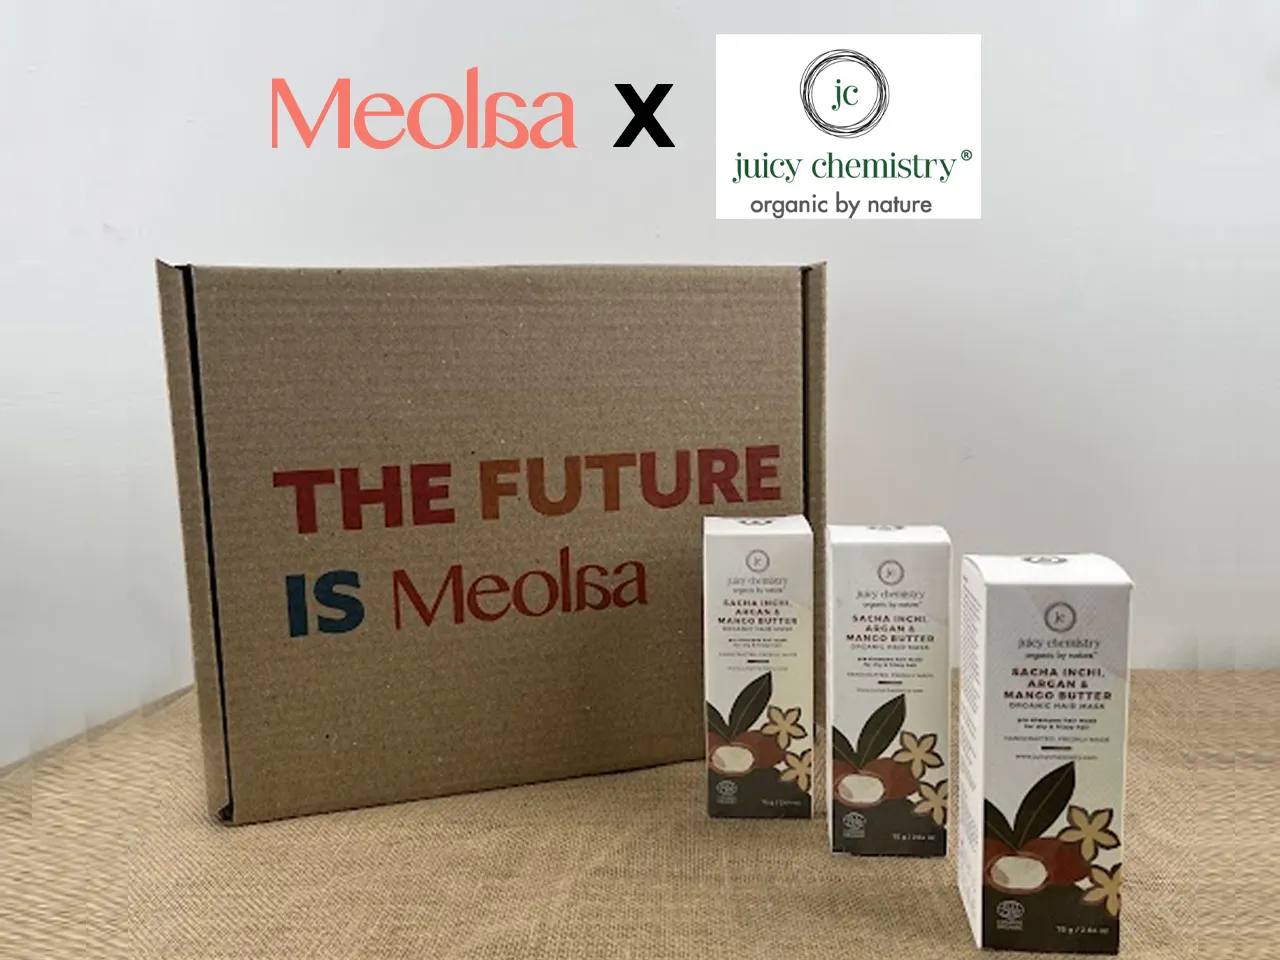 Meolaa and Juicy Chemistry Collaborate for Conscious Living!